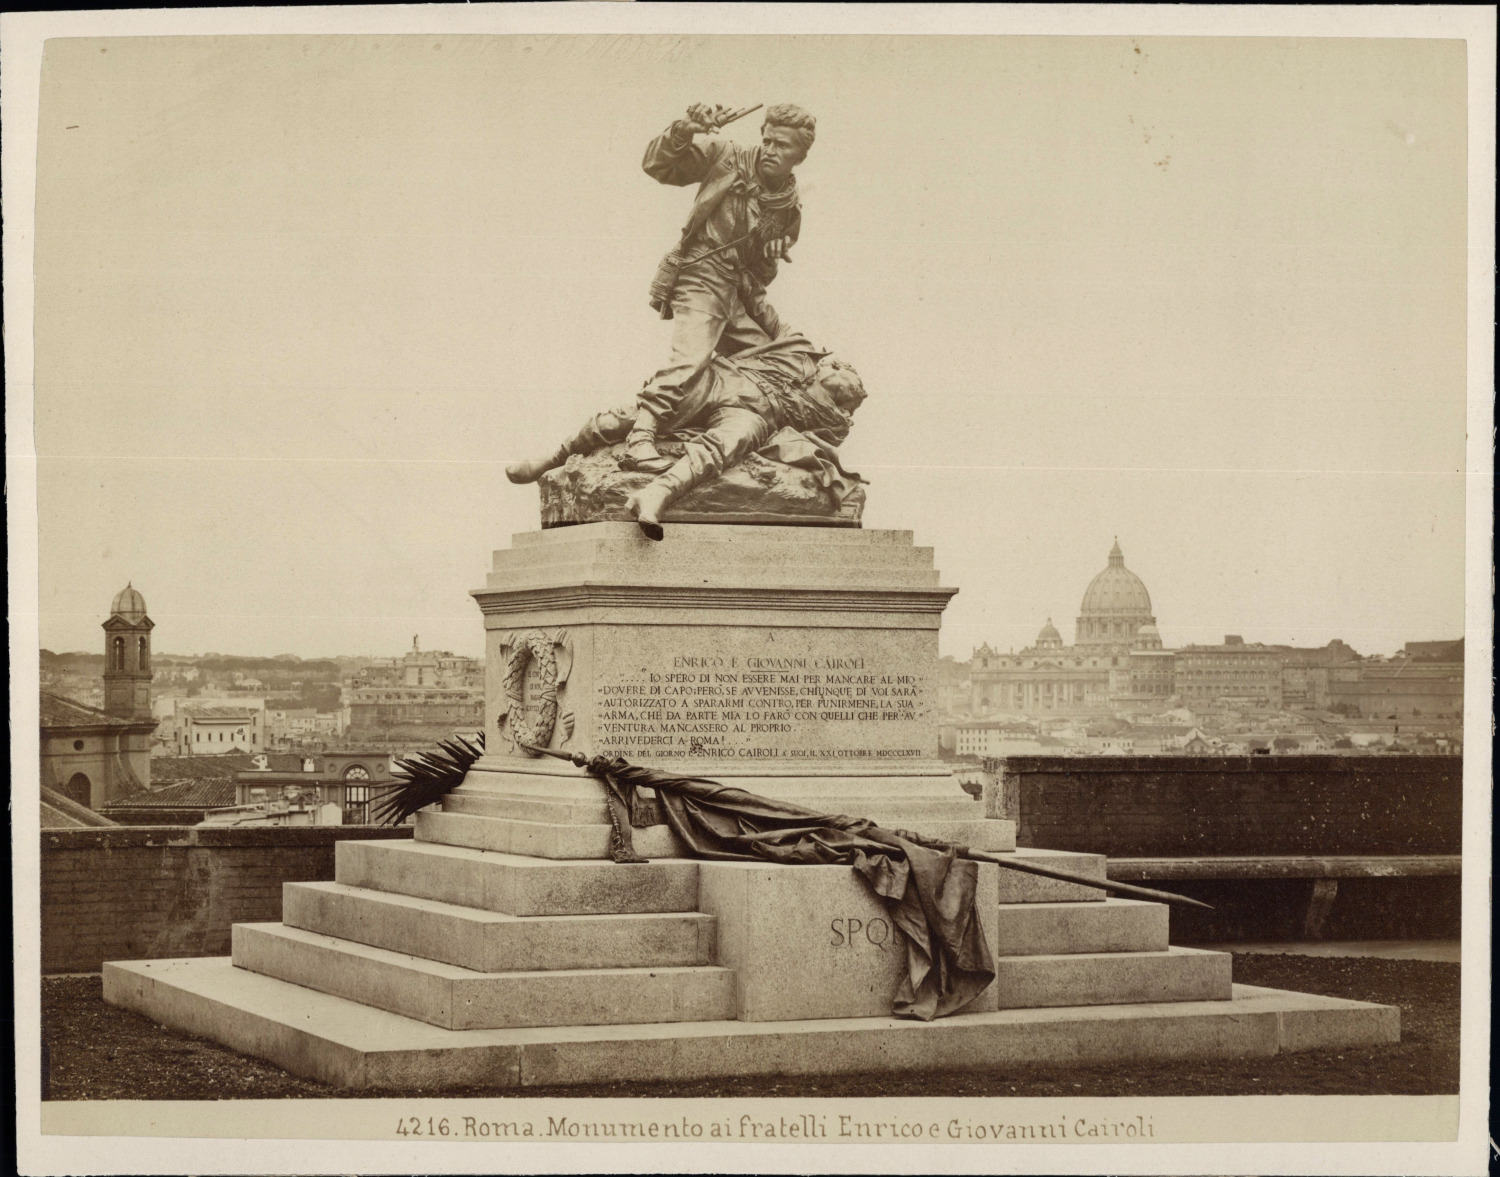 Italy, Rome, Monument to the brothers Enrico and Giovanni Cairoli, ca.1880, print vi